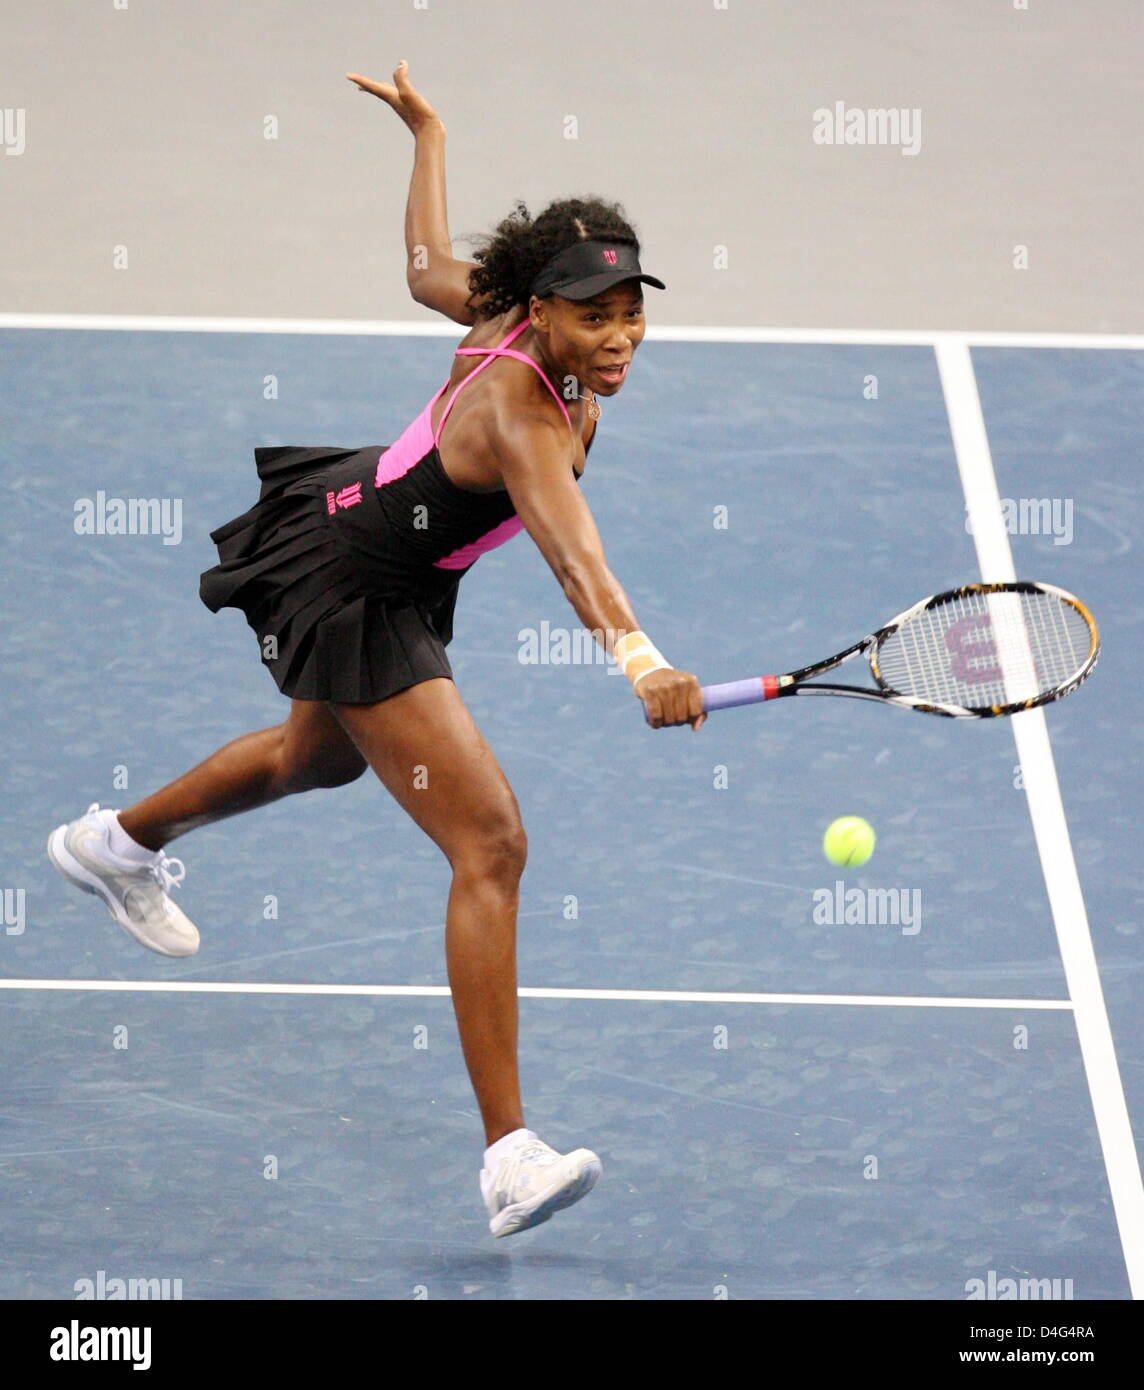 Venus Williams (USA) seen in action during her doubles match together with her sister Serena (not depicted) against Daniela Hantuchova (SVK) and Agnes Szavay (HUN) at the Porsche Tennis Grand Prix at Porsche Arena in Stuttgart, Germany, 29 September 2008. Photo: BERND WEISSBROD Stock Photo